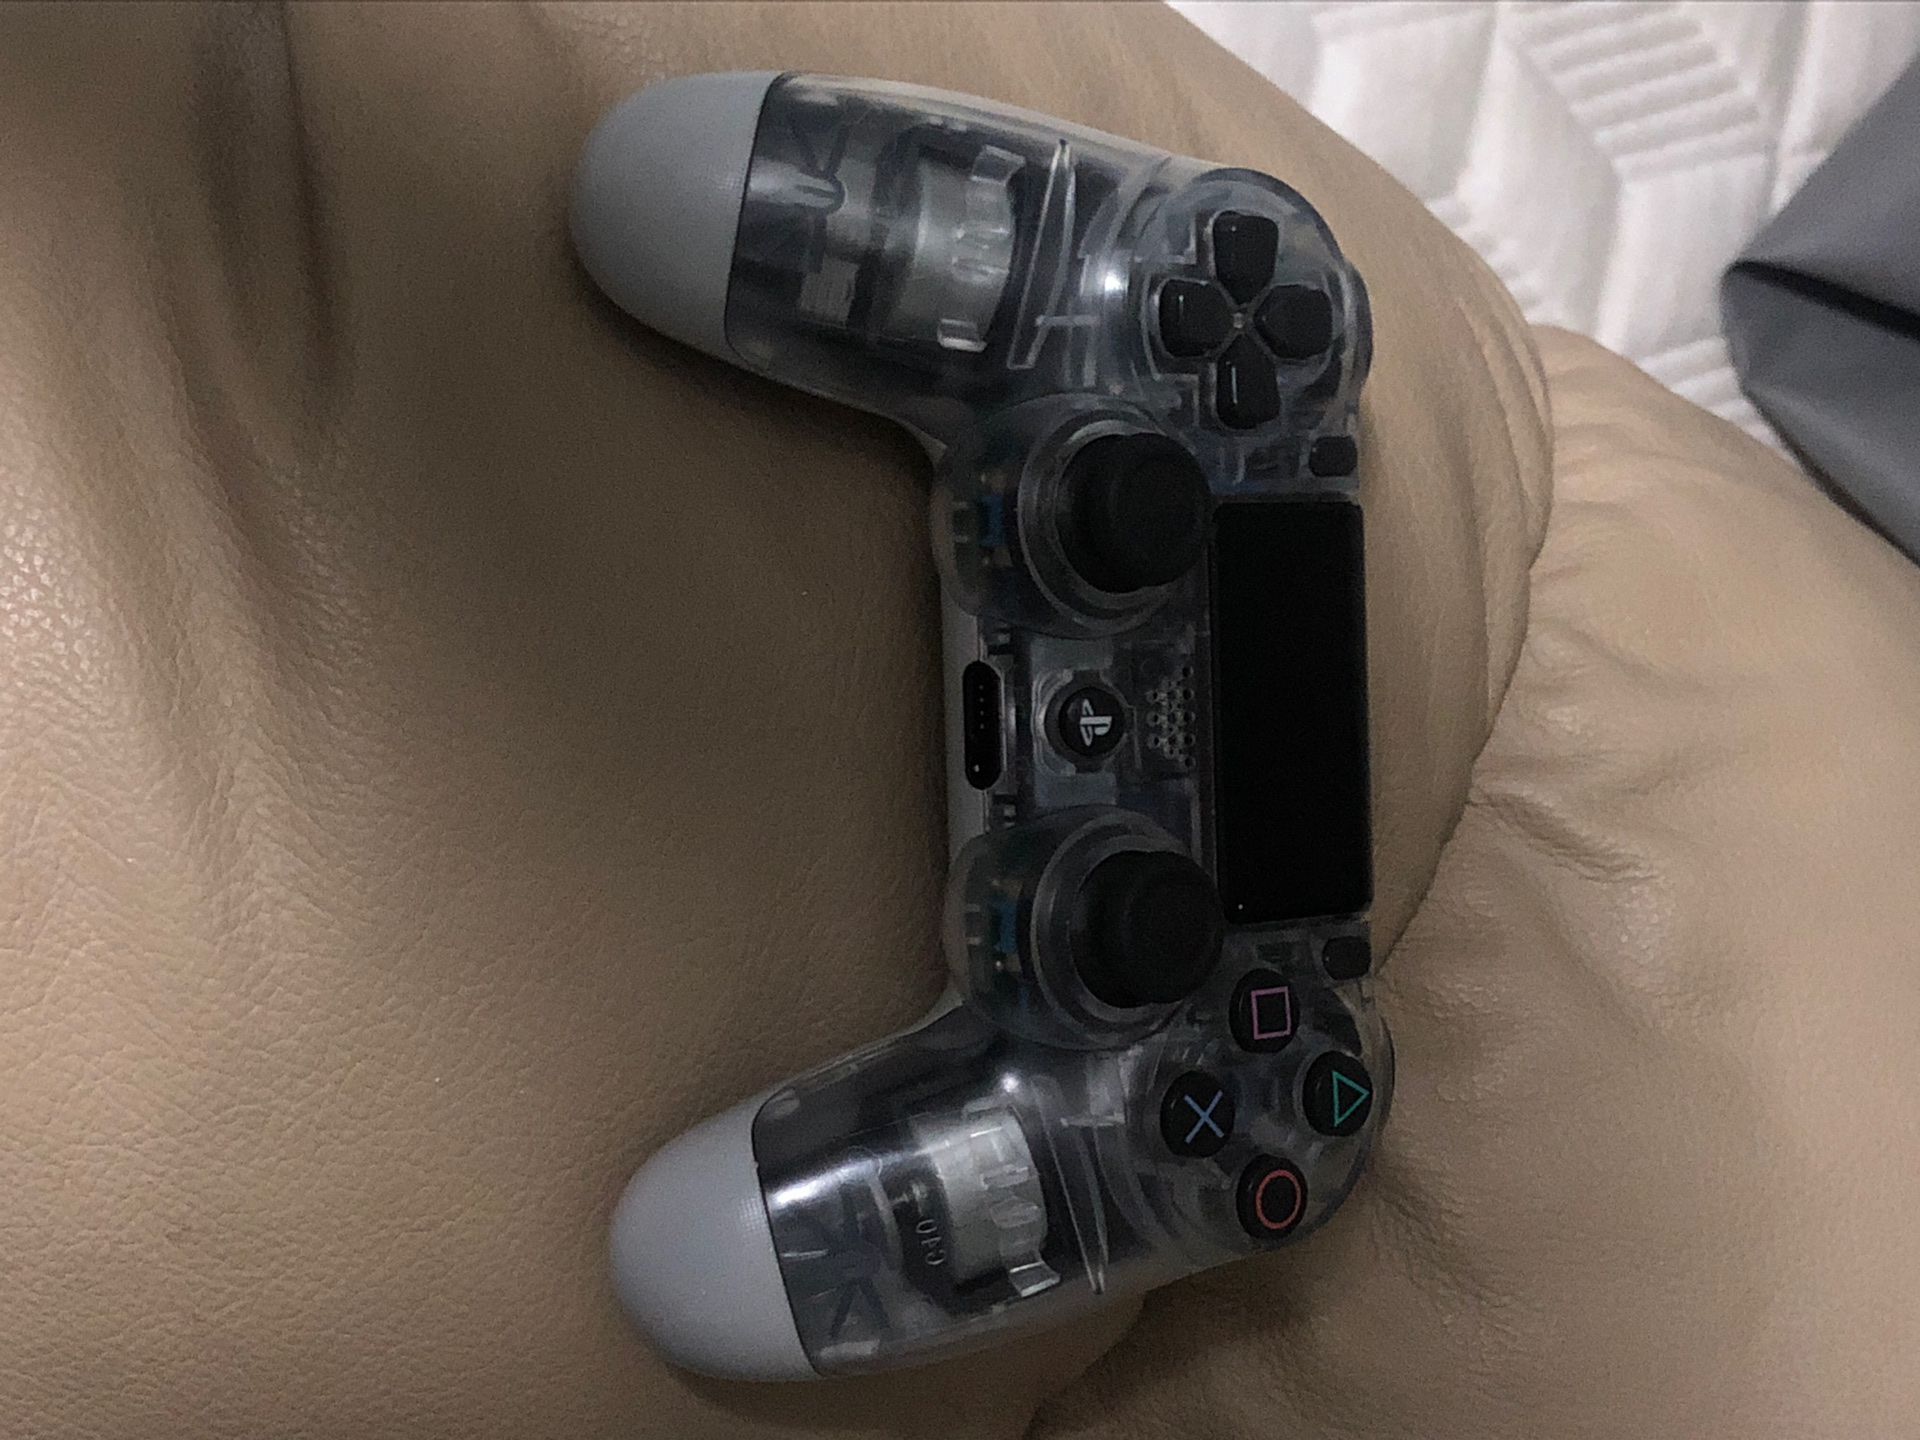 PlayStation 4 + controller